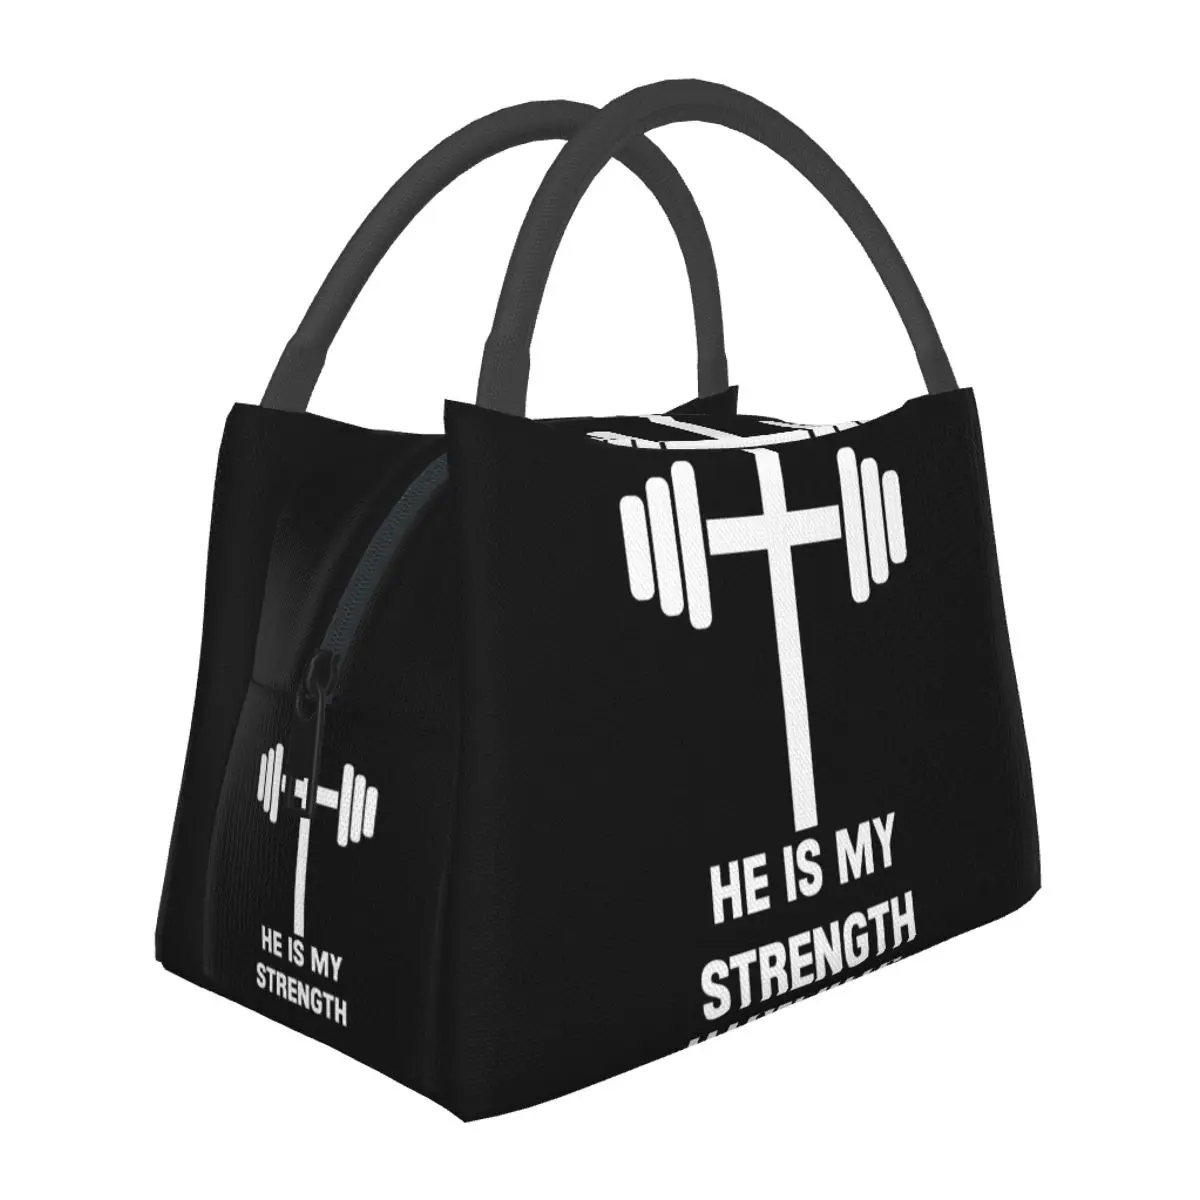 

Gym Working Out Lunch Bag for Christian God Strength Catholic Gym Motivational Thermal Cooler Picnic Religious Oxford Lunch Box